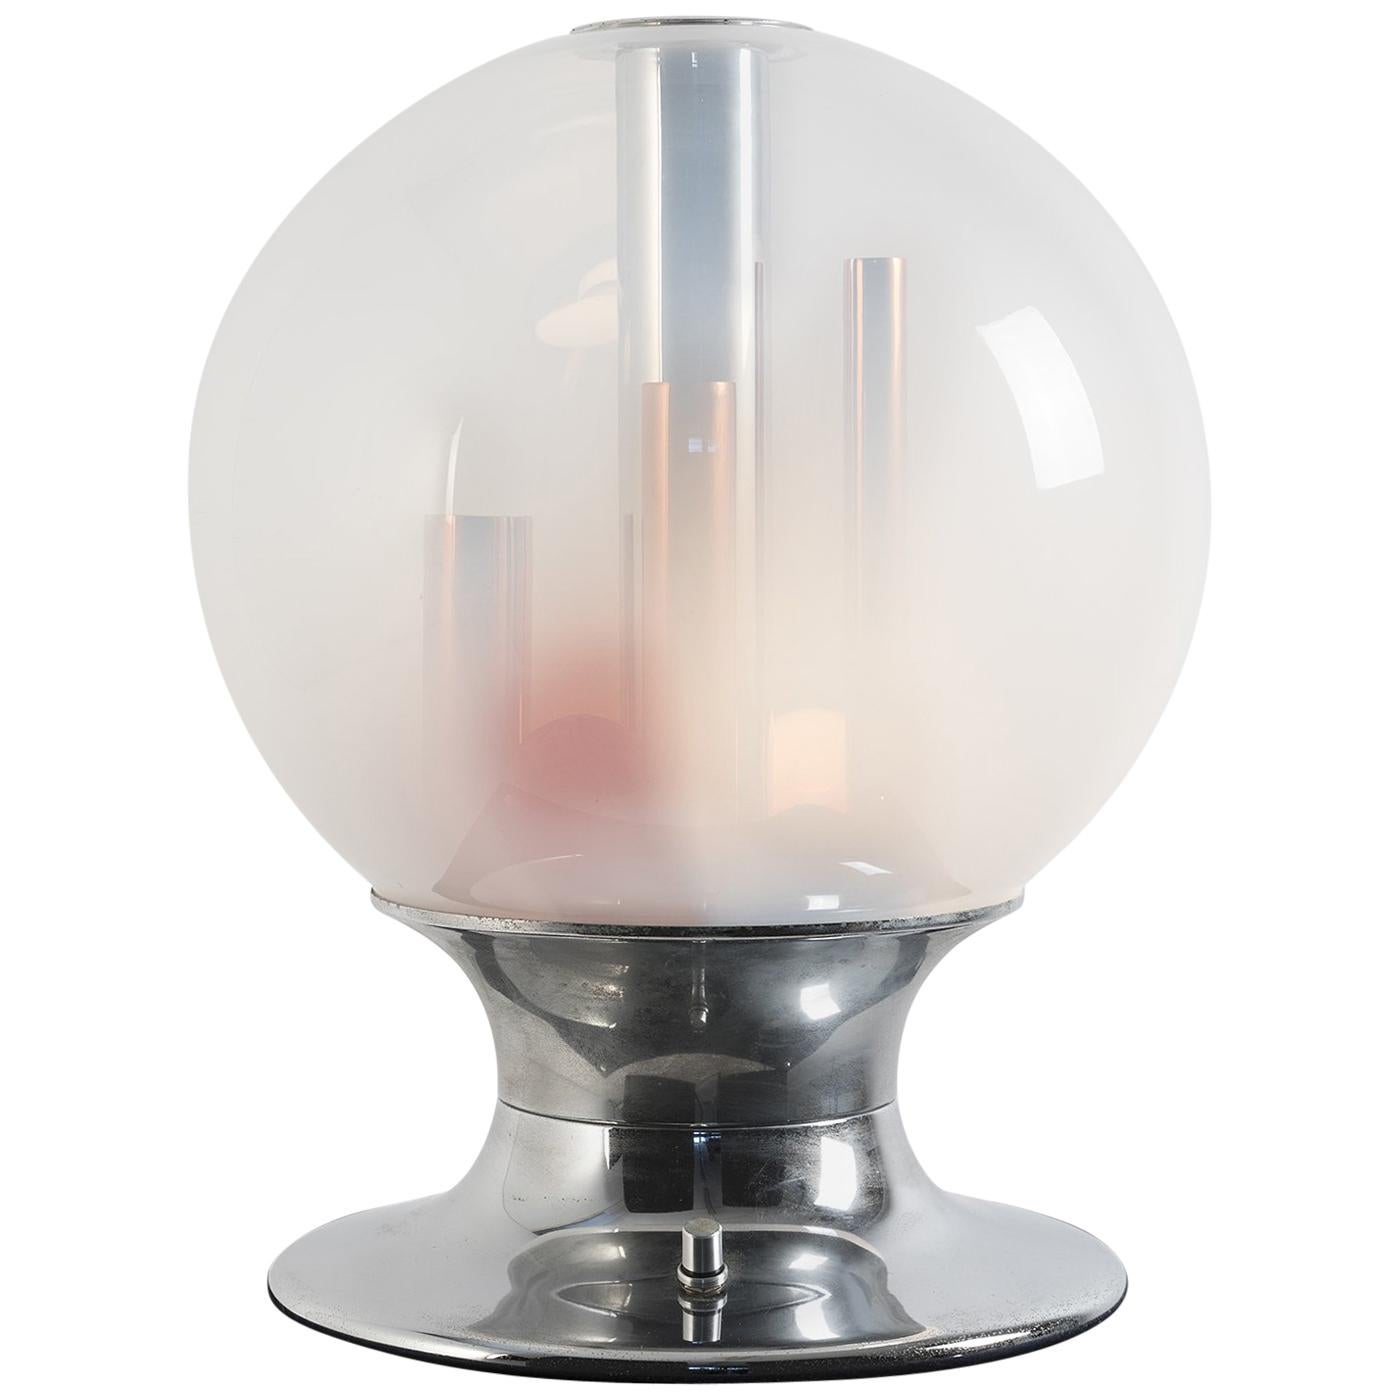 ITER Elettronica Dimmer Light Table Lamp from the 1970s